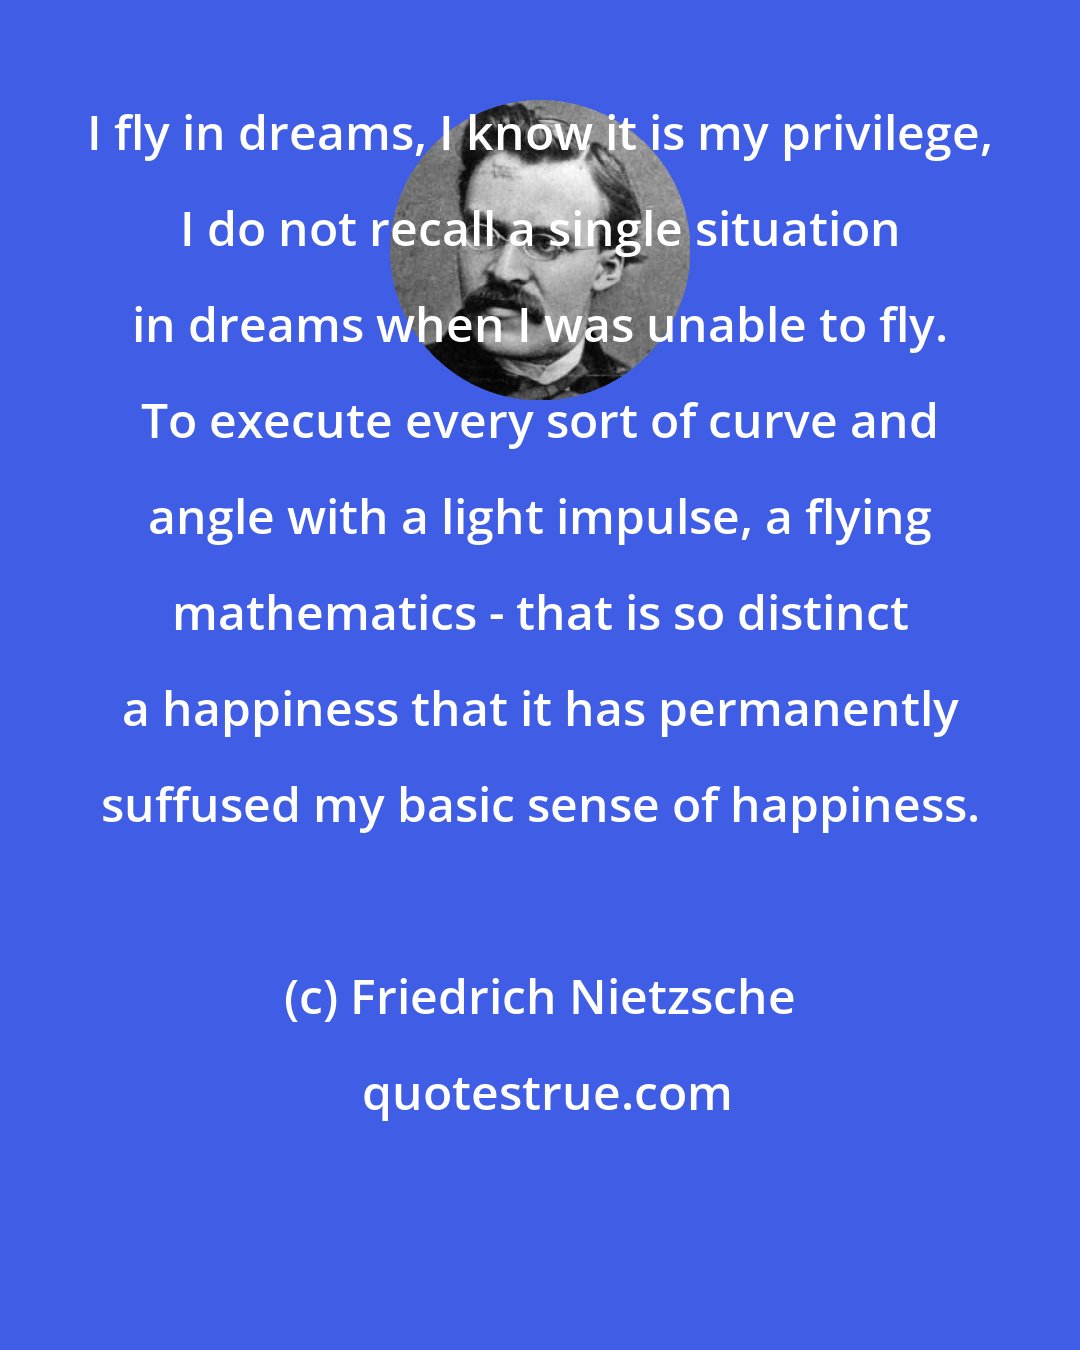 Friedrich Nietzsche: I fly in dreams, I know it is my privilege, I do not recall a single situation in dreams when I was unable to fly. To execute every sort of curve and angle with a light impulse, a flying mathematics - that is so distinct a happiness that it has permanently suffused my basic sense of happiness.